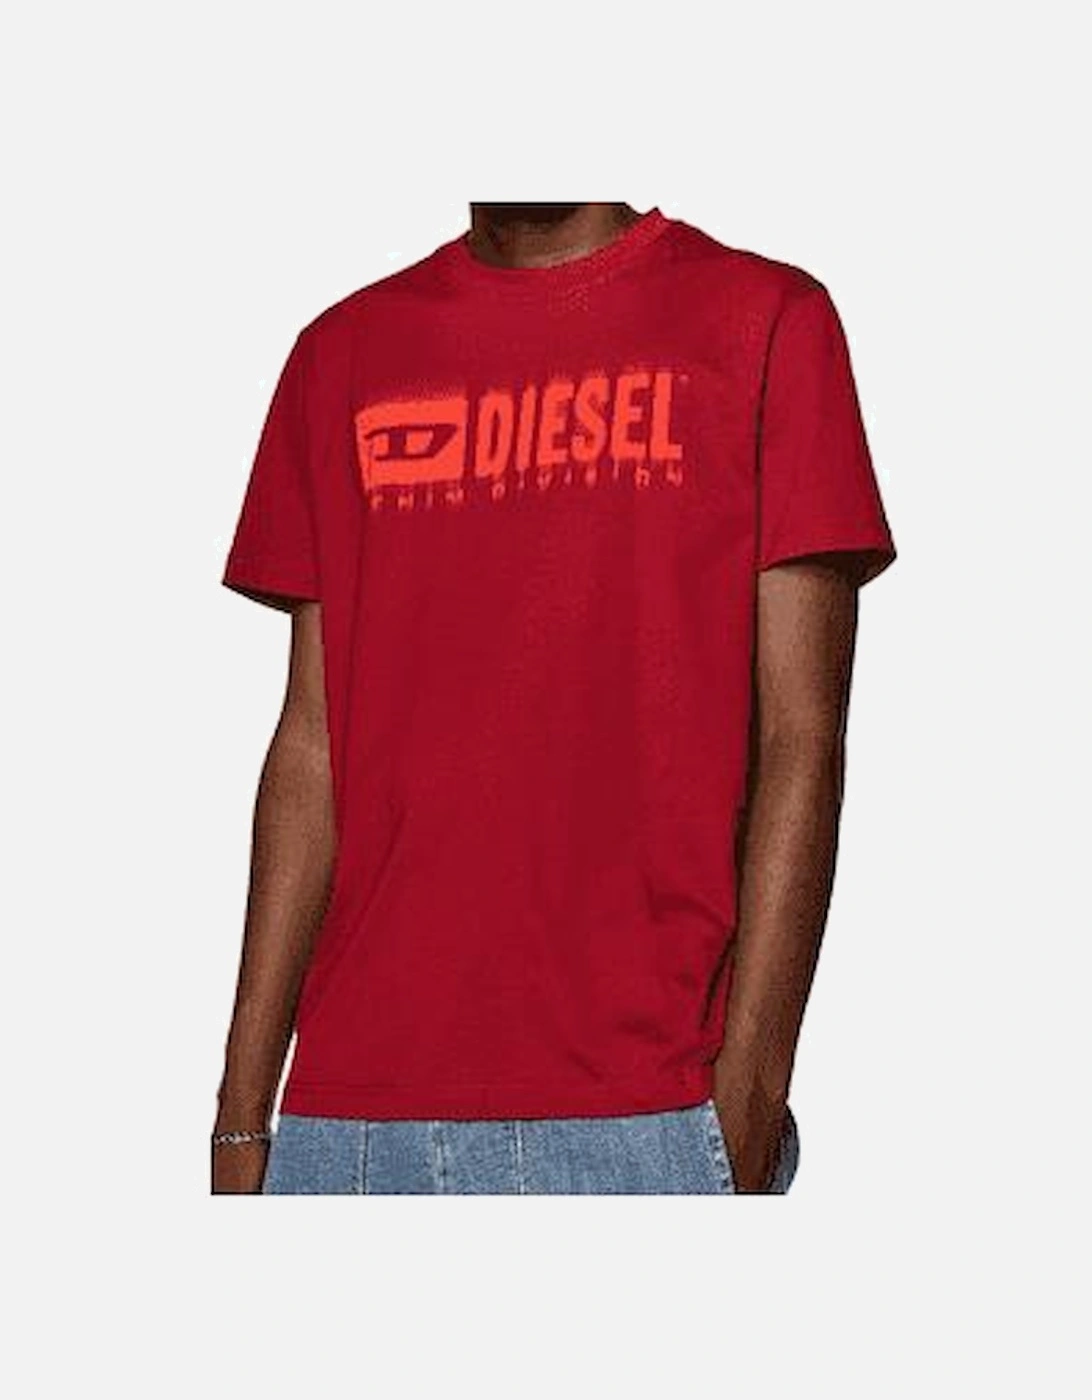 T-DIEGOR Smeared Logo Print Cotton Red T-Shirt